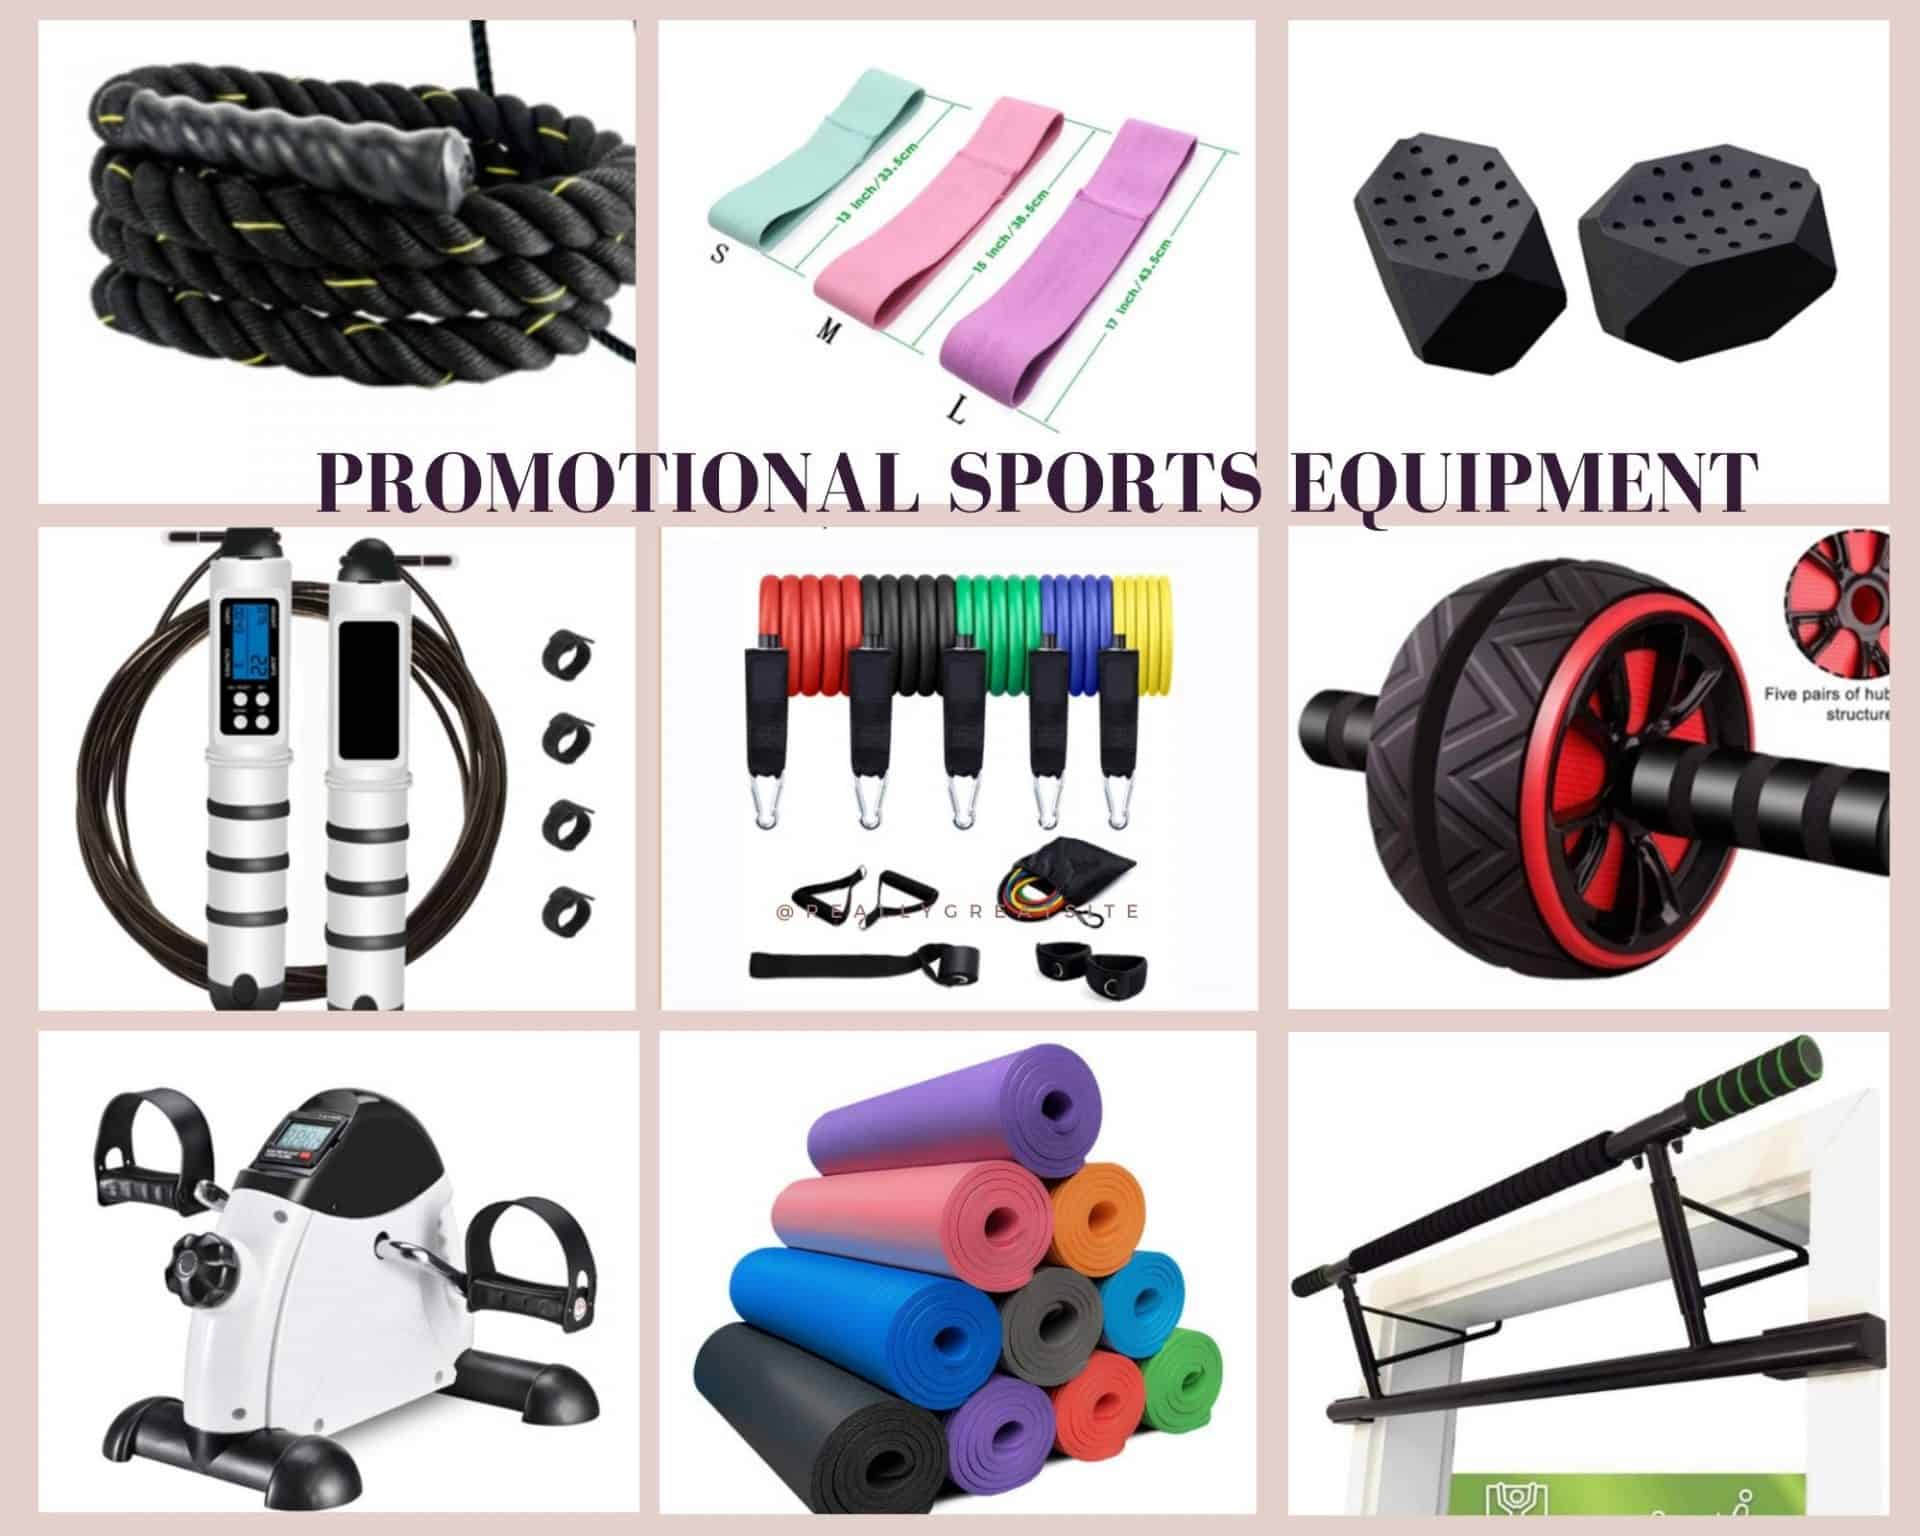 Exercise equipment giveaways